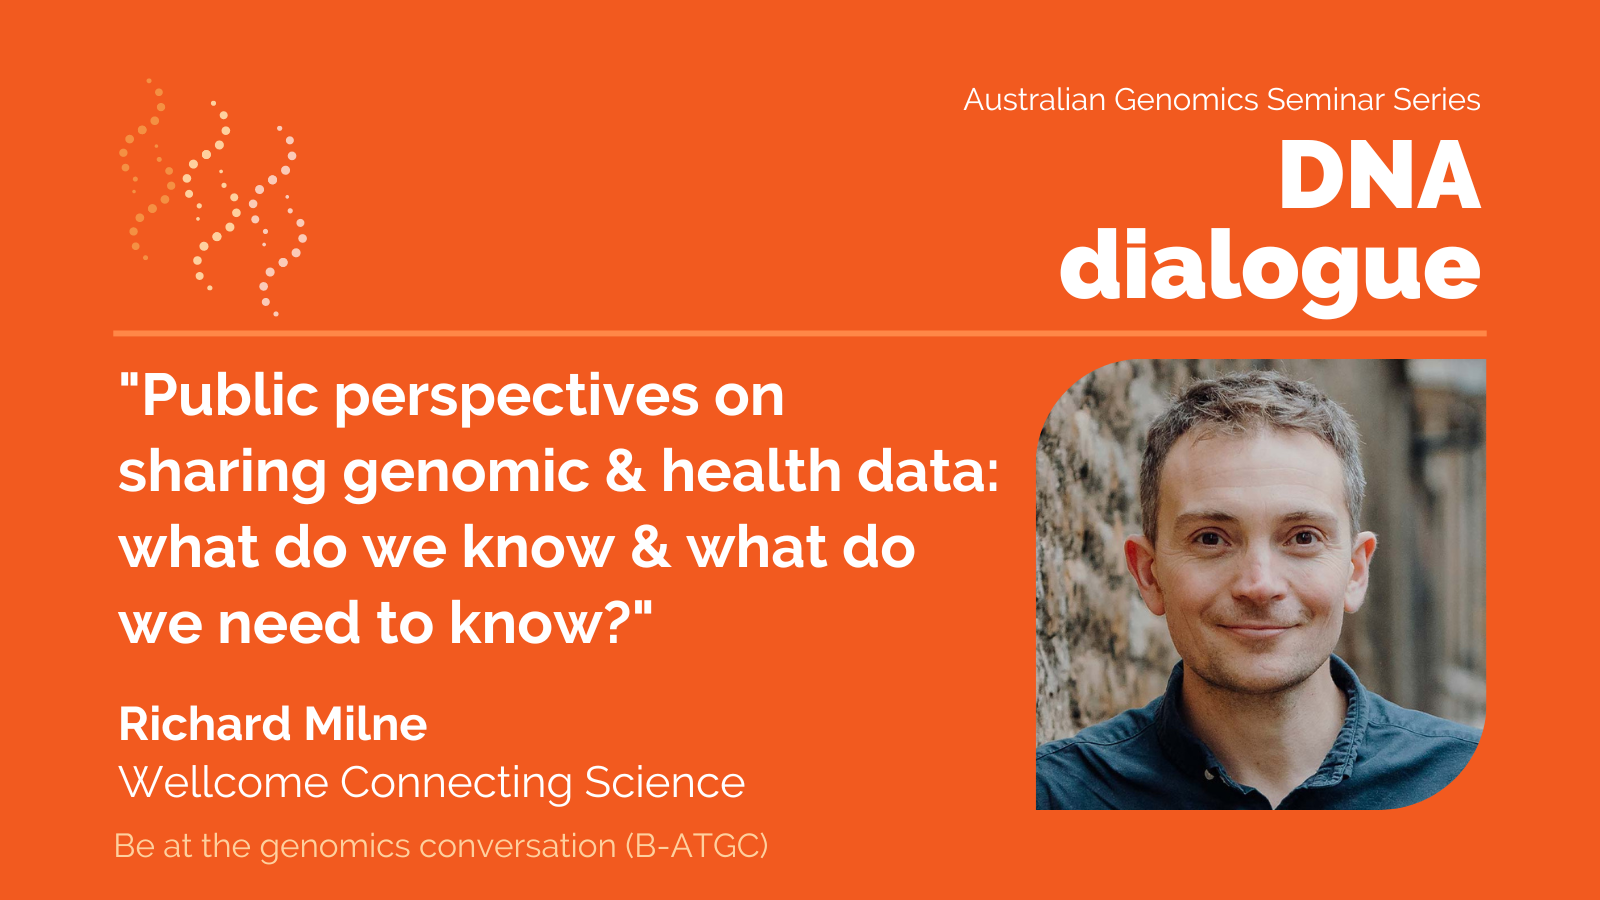 DNA dialogue with Richard Milne